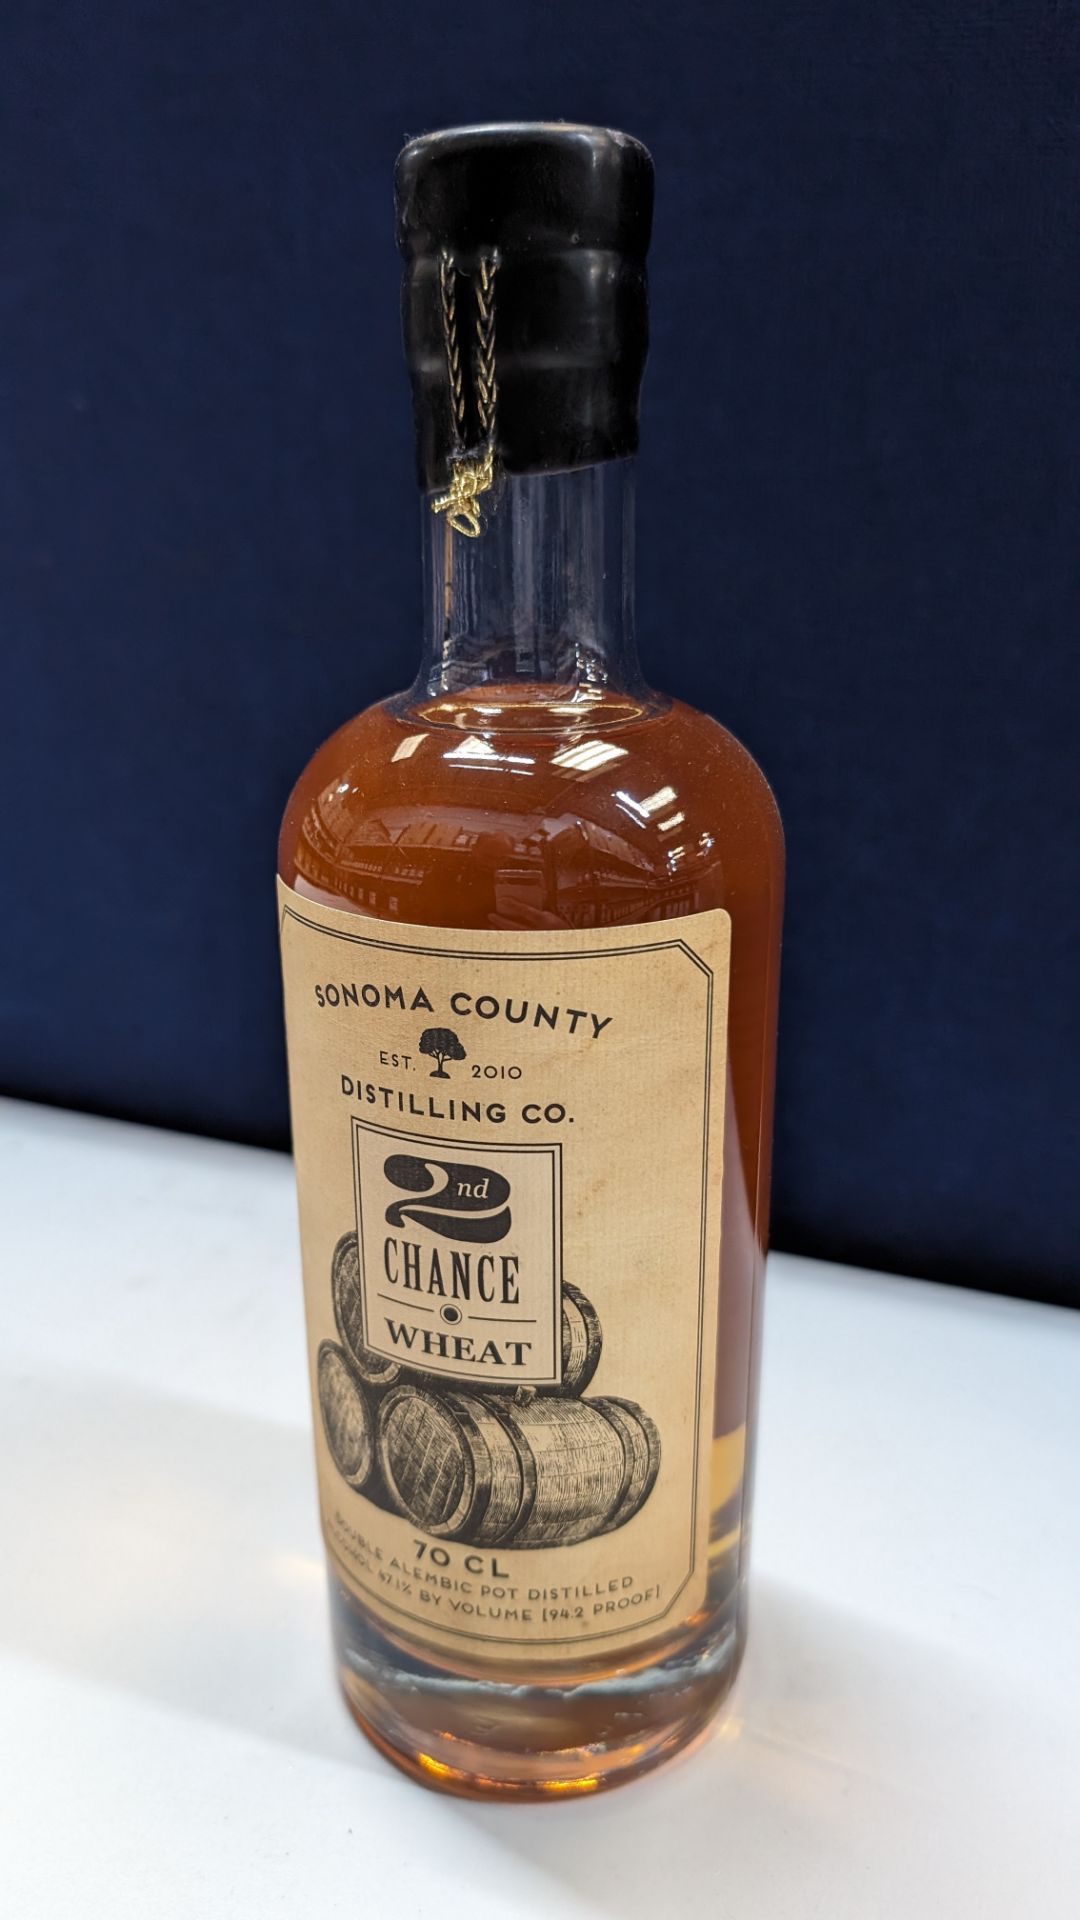 1 off 700ml bottle of Sonoma County 2nd Chance Wheat Double Alembic Pot Distilled Whiskey. 47.1% al - Image 2 of 6